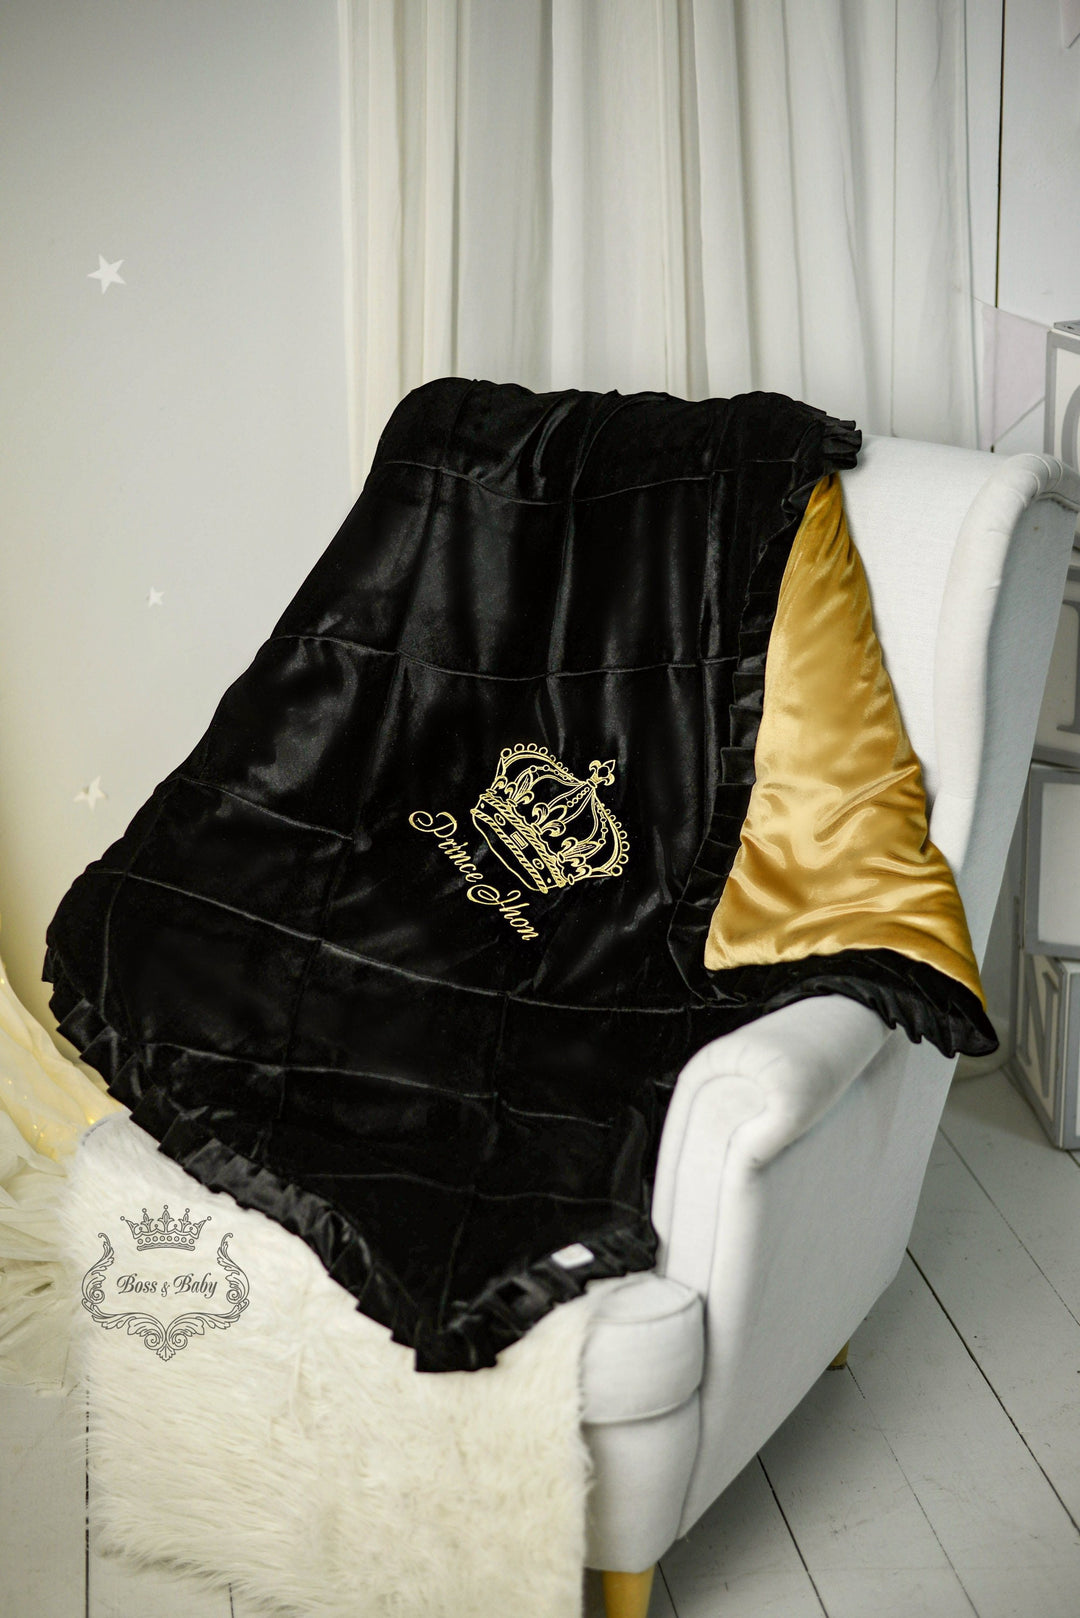 Luxurious Black and Gold Baby Crib Bumpers - King Theme for Boys